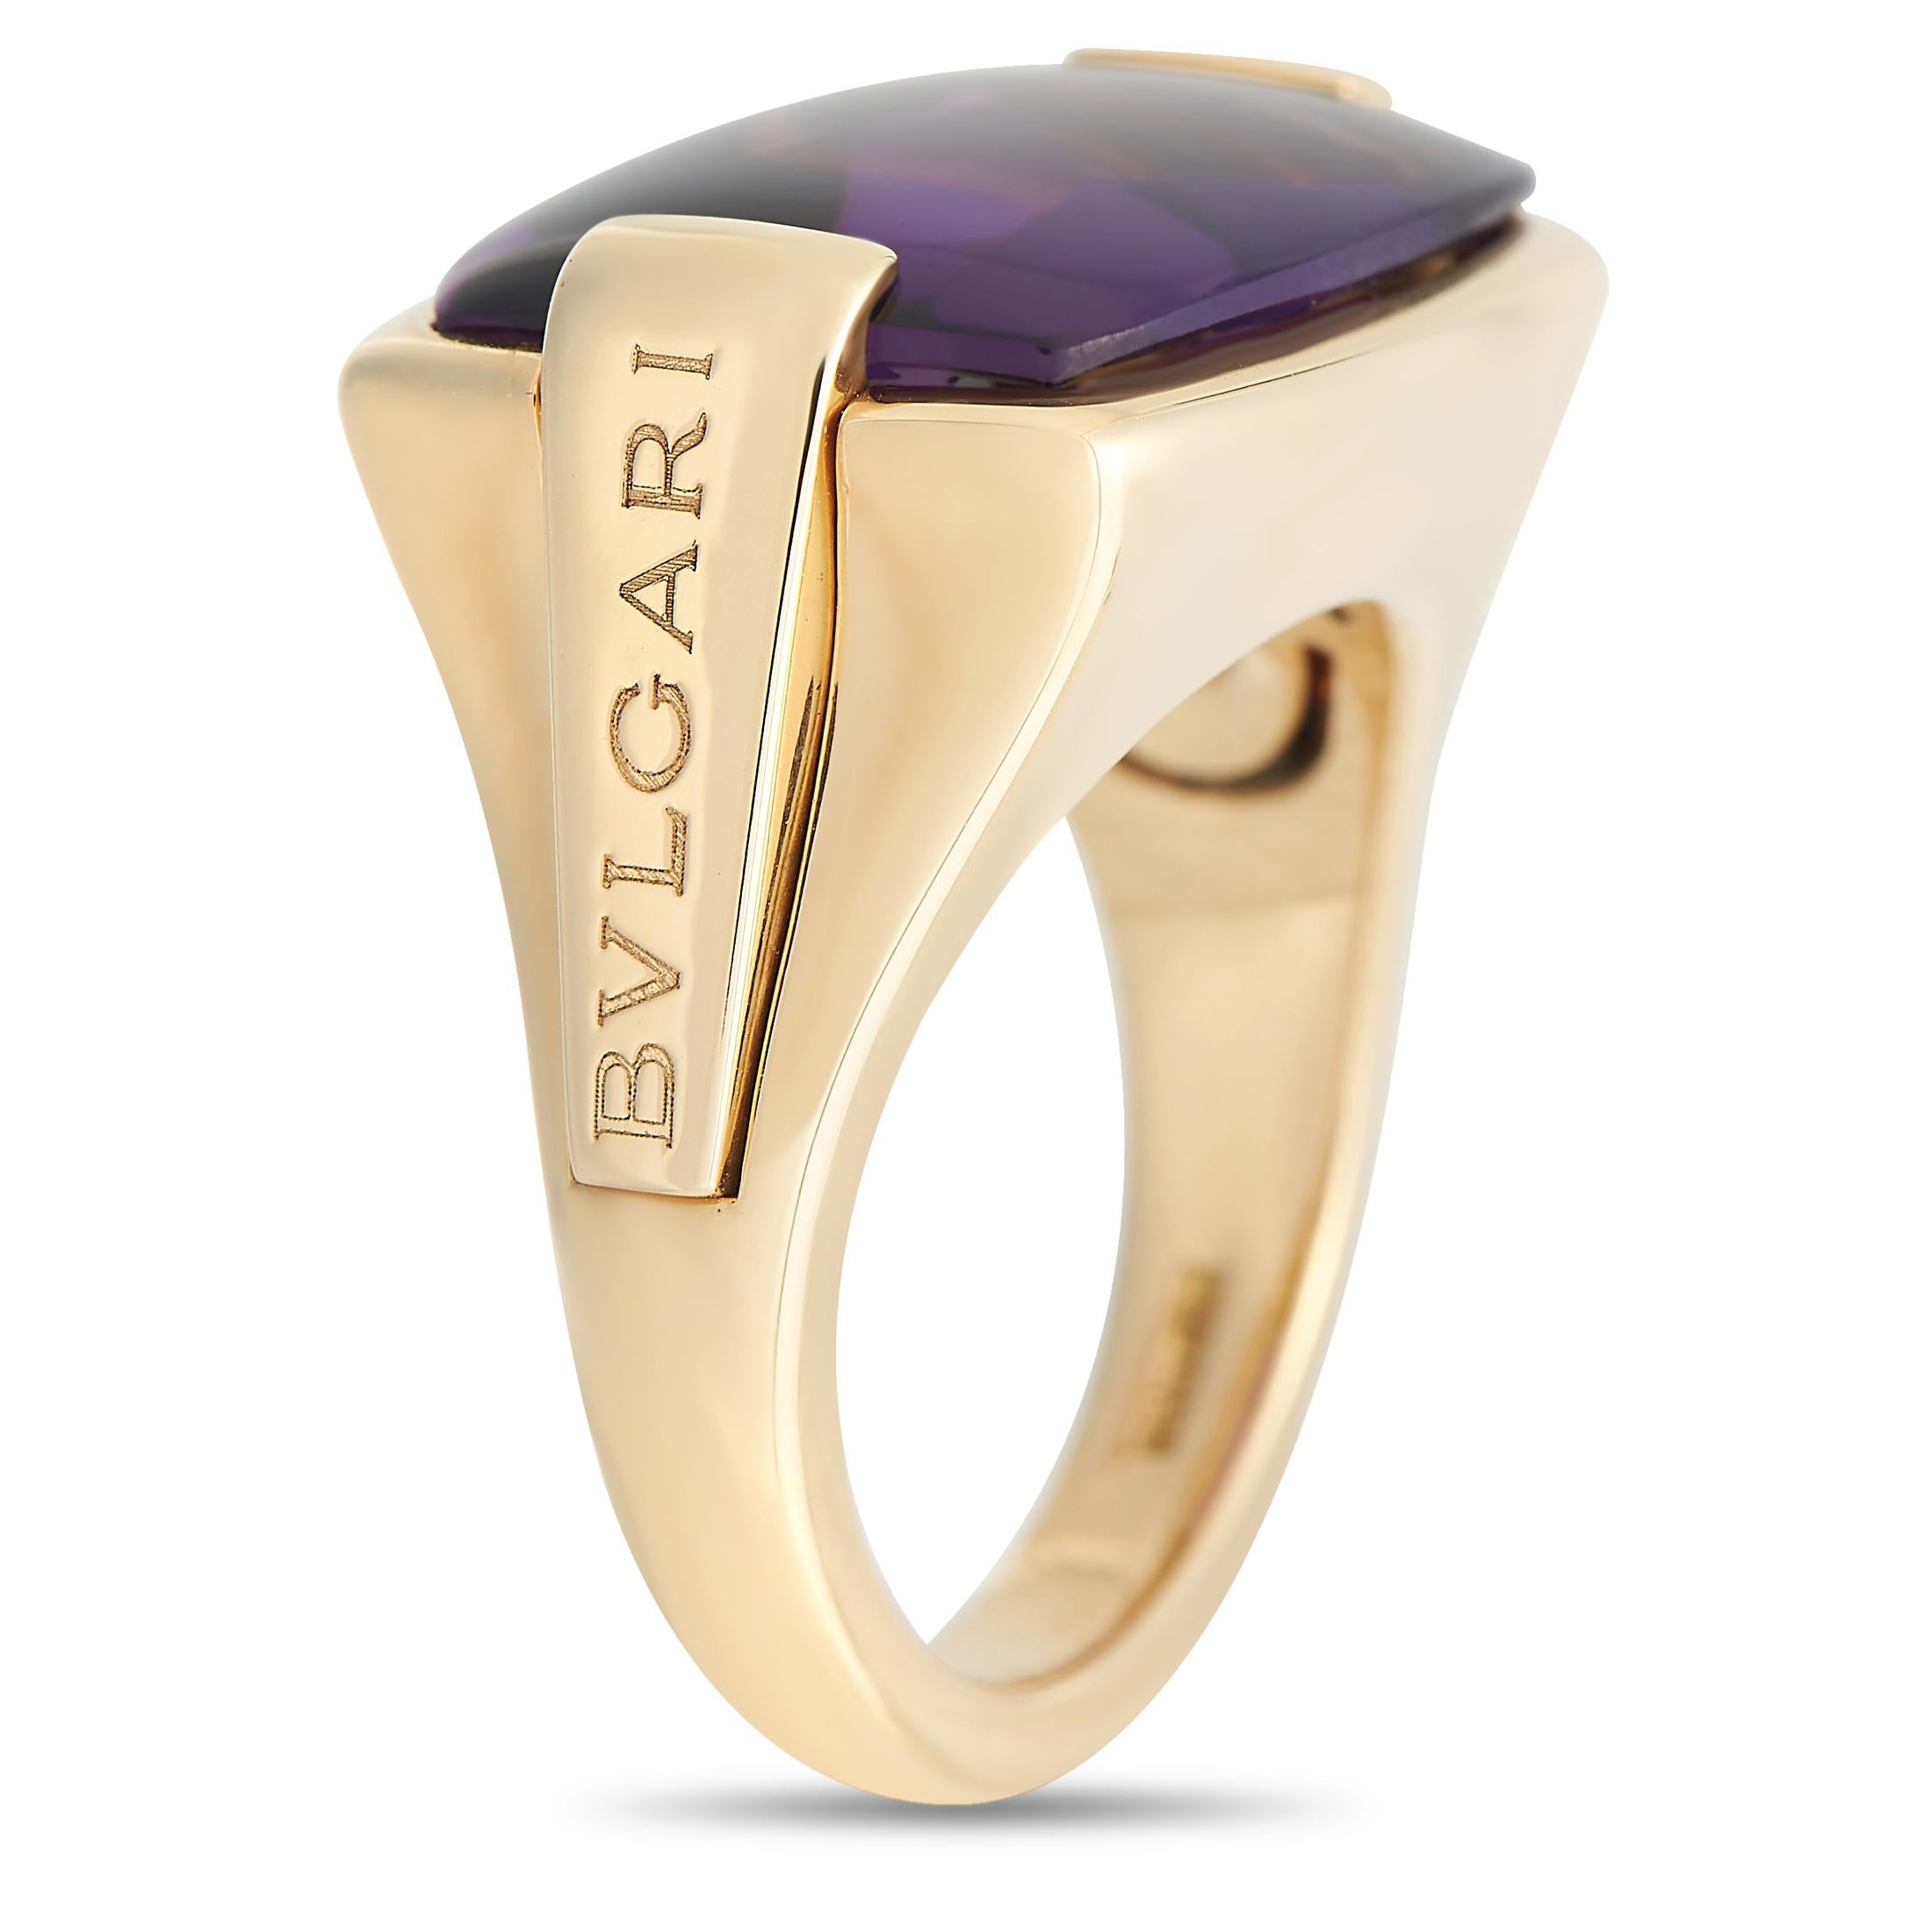 A stunning Amethyst gemstone sits at the center of this commanding ring from the Bvlgari Metropolis collection. The luxury brand’s signature is engraved on each side of the 18K Yellow Gold setting, which features a 3mm wide band and a 6mm top